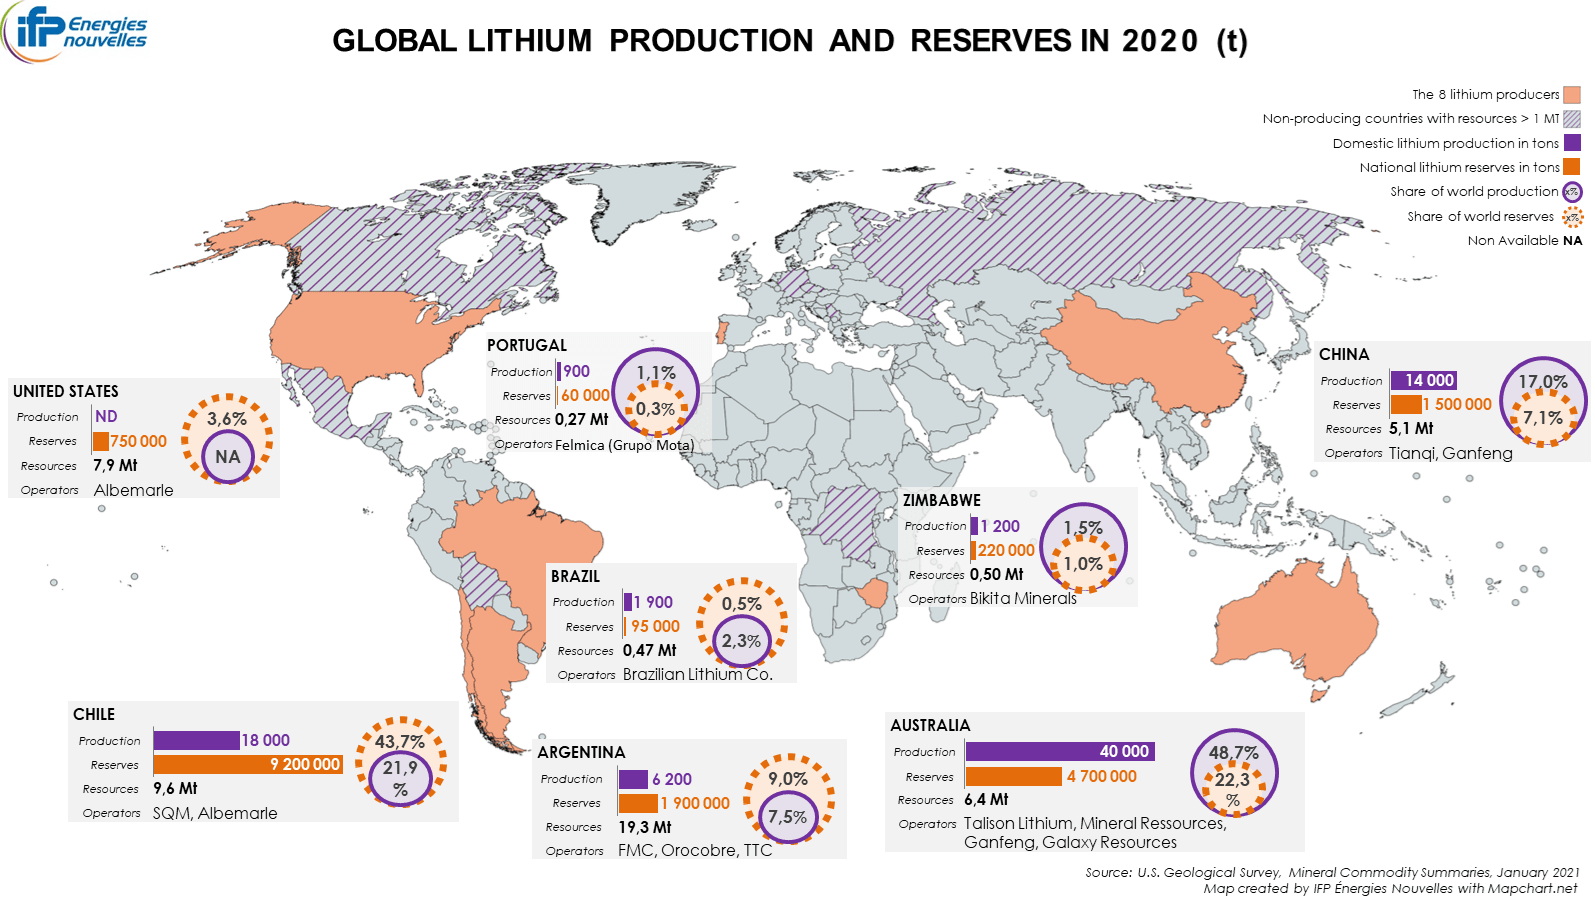 Global lithium production and reserves in 2020